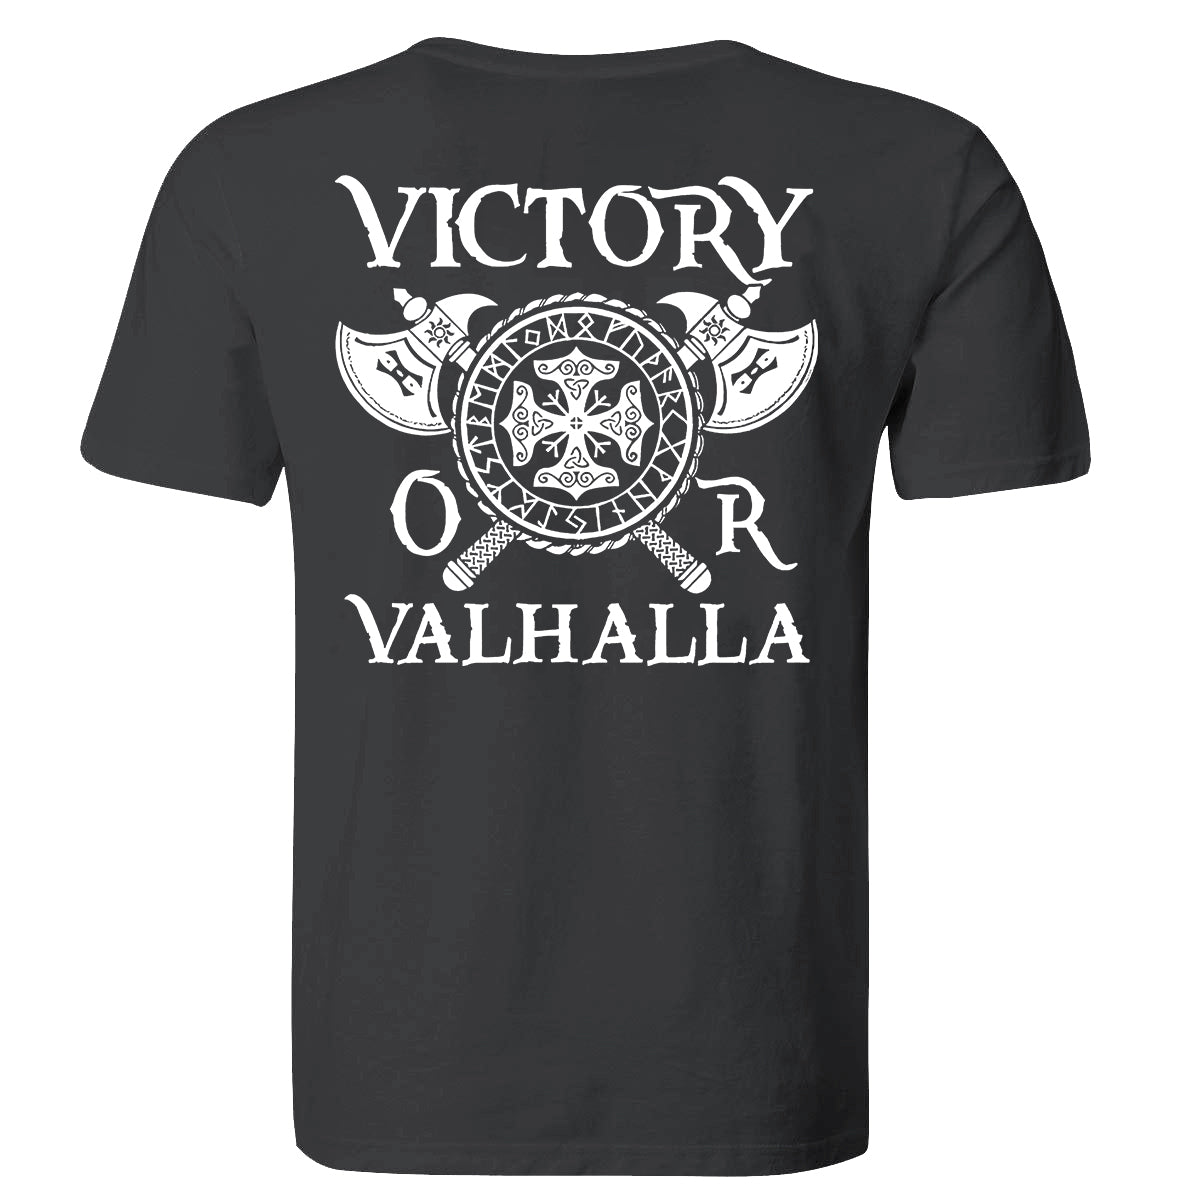 Victory Letter Axes Printed Men's T-shirt